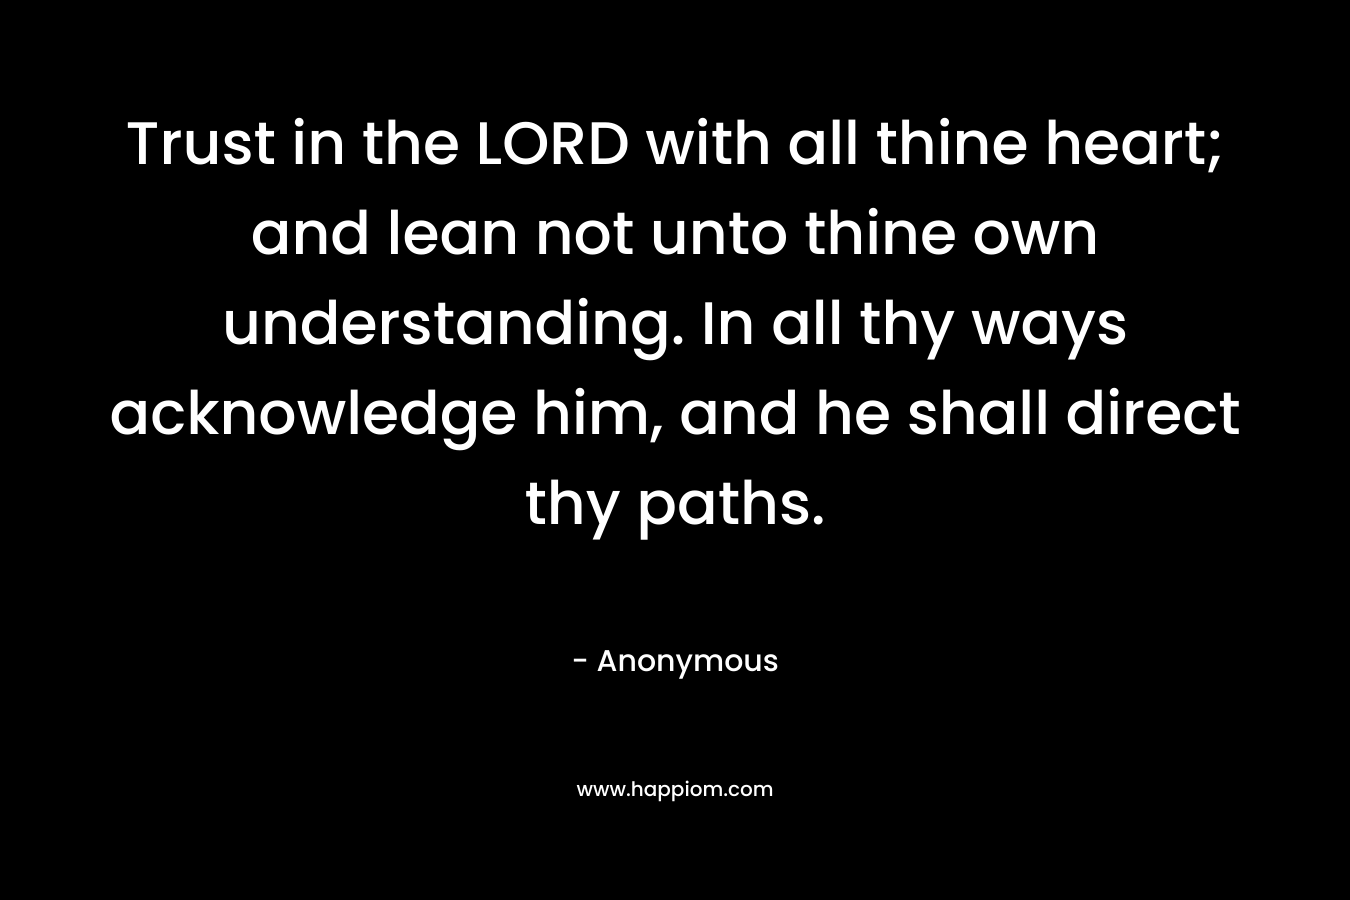 Trust in the LORD with all thine heart; and lean not unto thine own understanding. In all thy ways acknowledge him, and he shall direct thy paths.